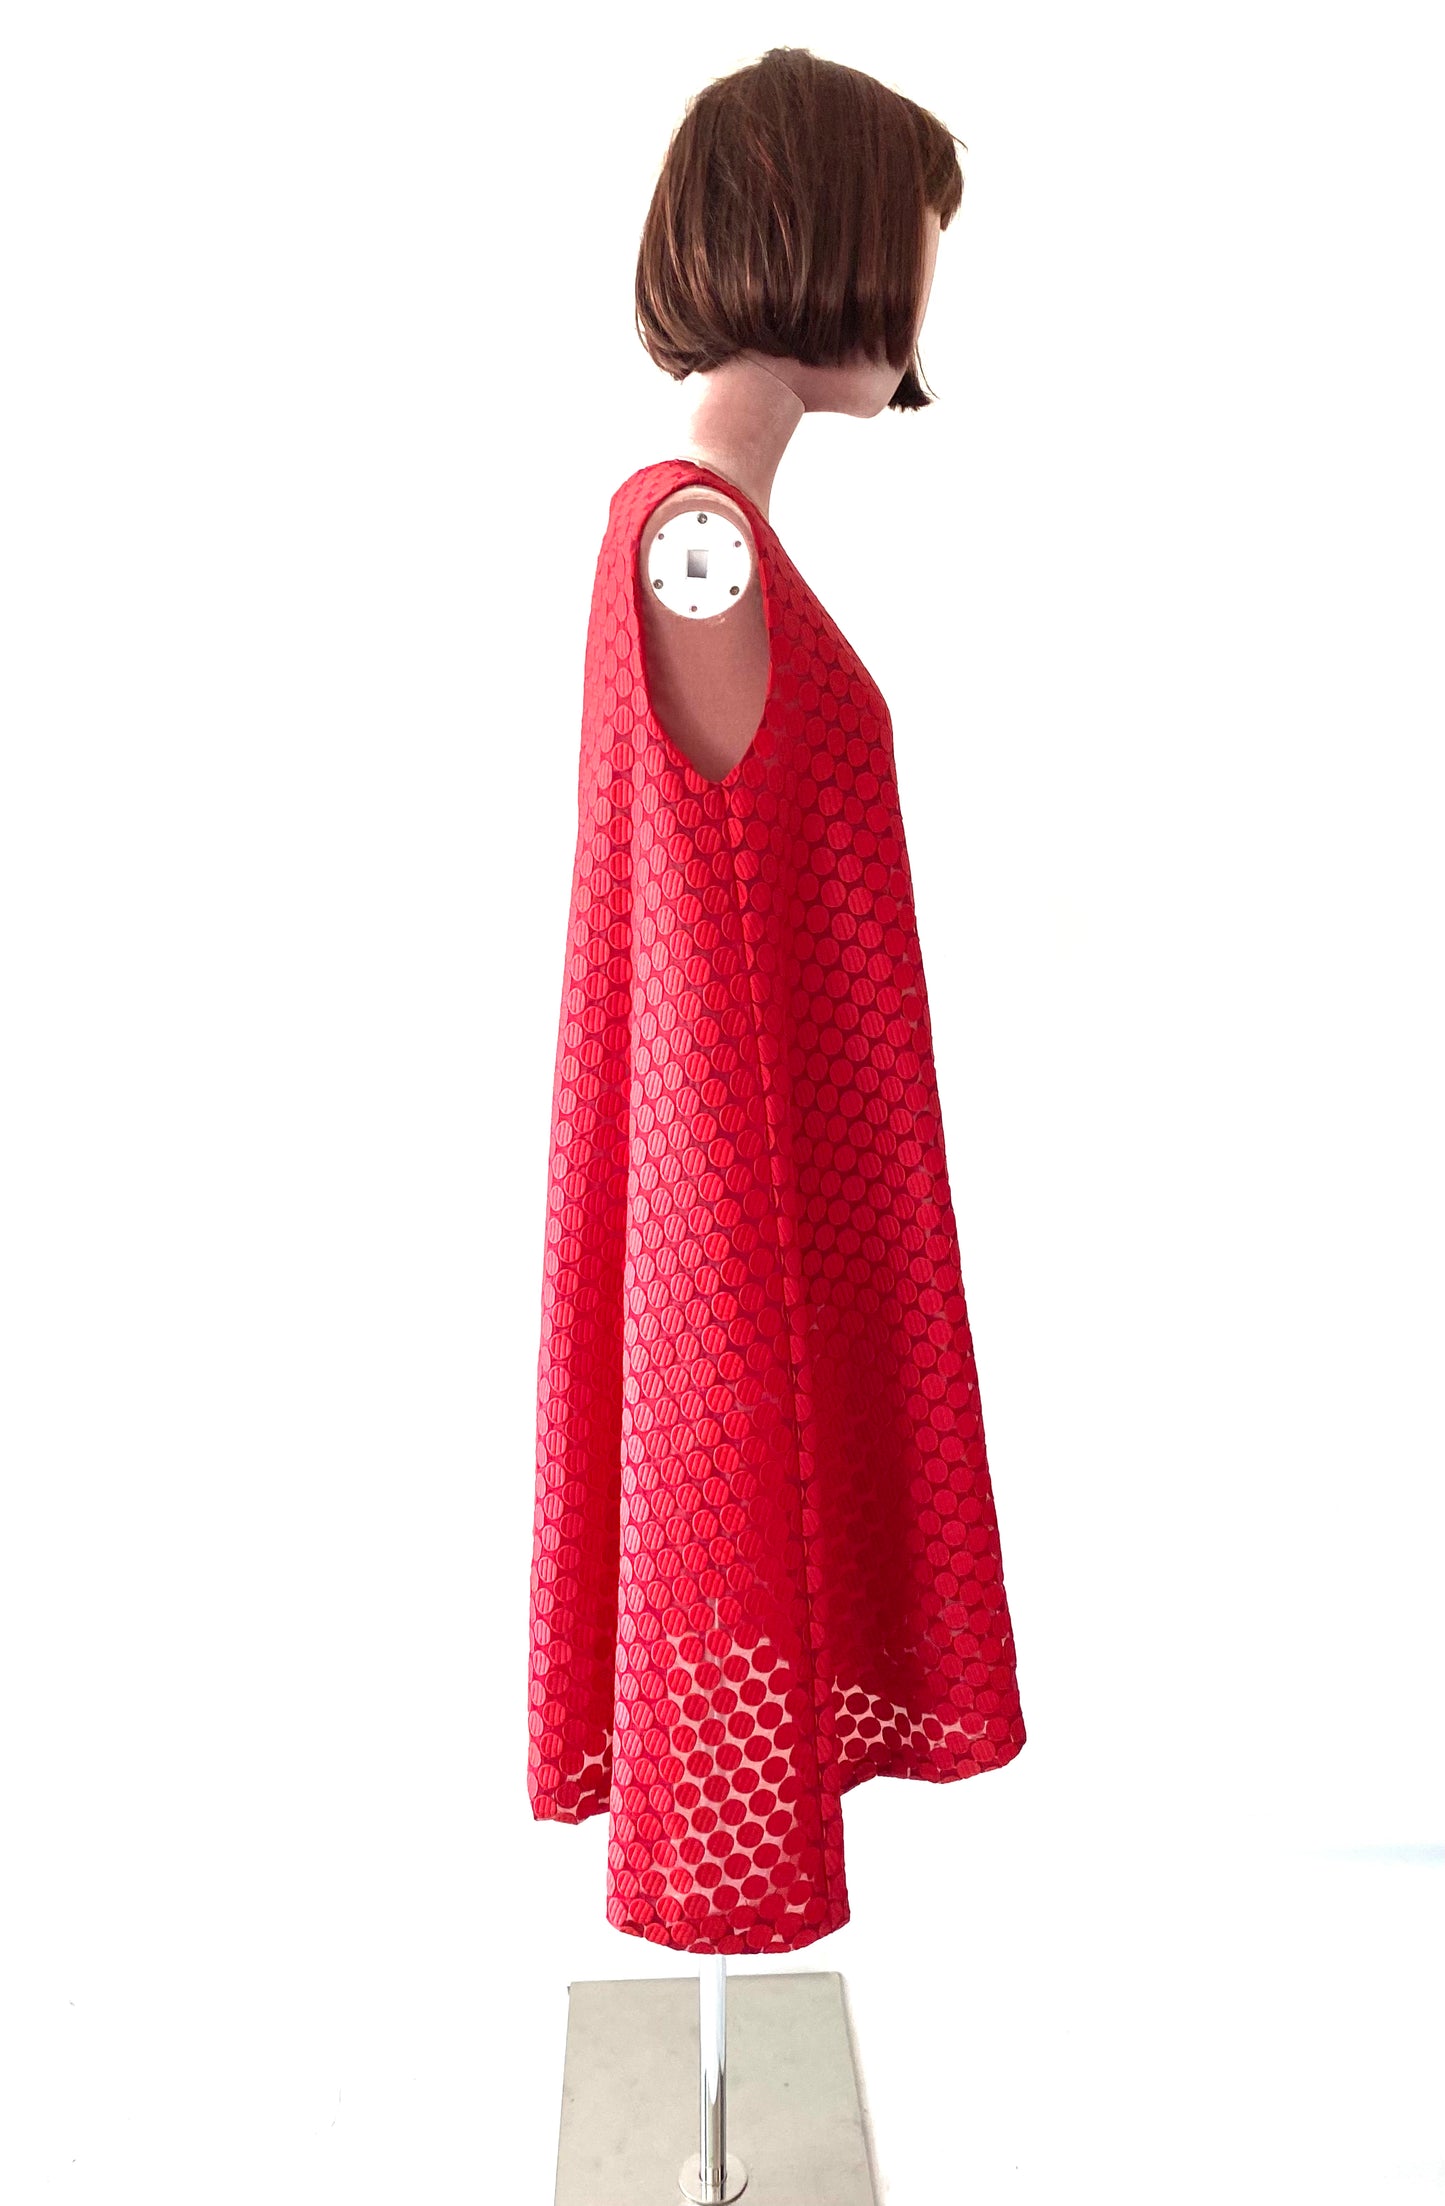 Red lace cocktail party Dress.Sleeveless dress.Doll style Dress.